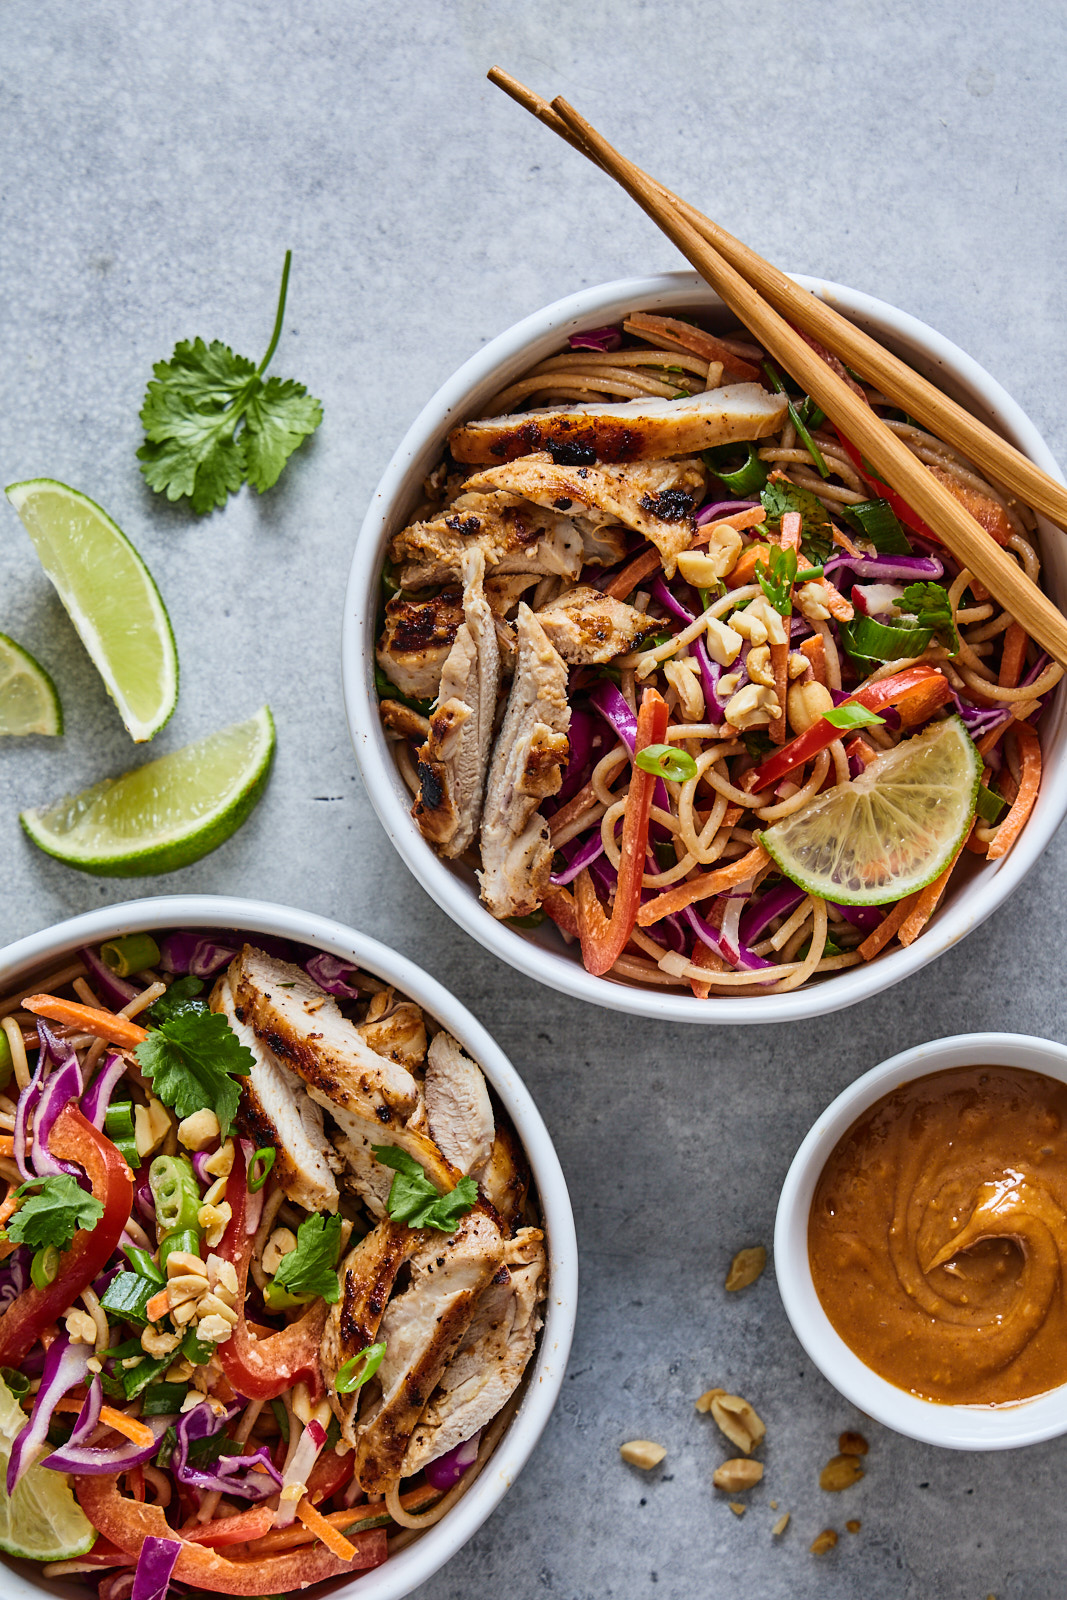 Cold Peanut Noodle Salad With Grilled Chicken